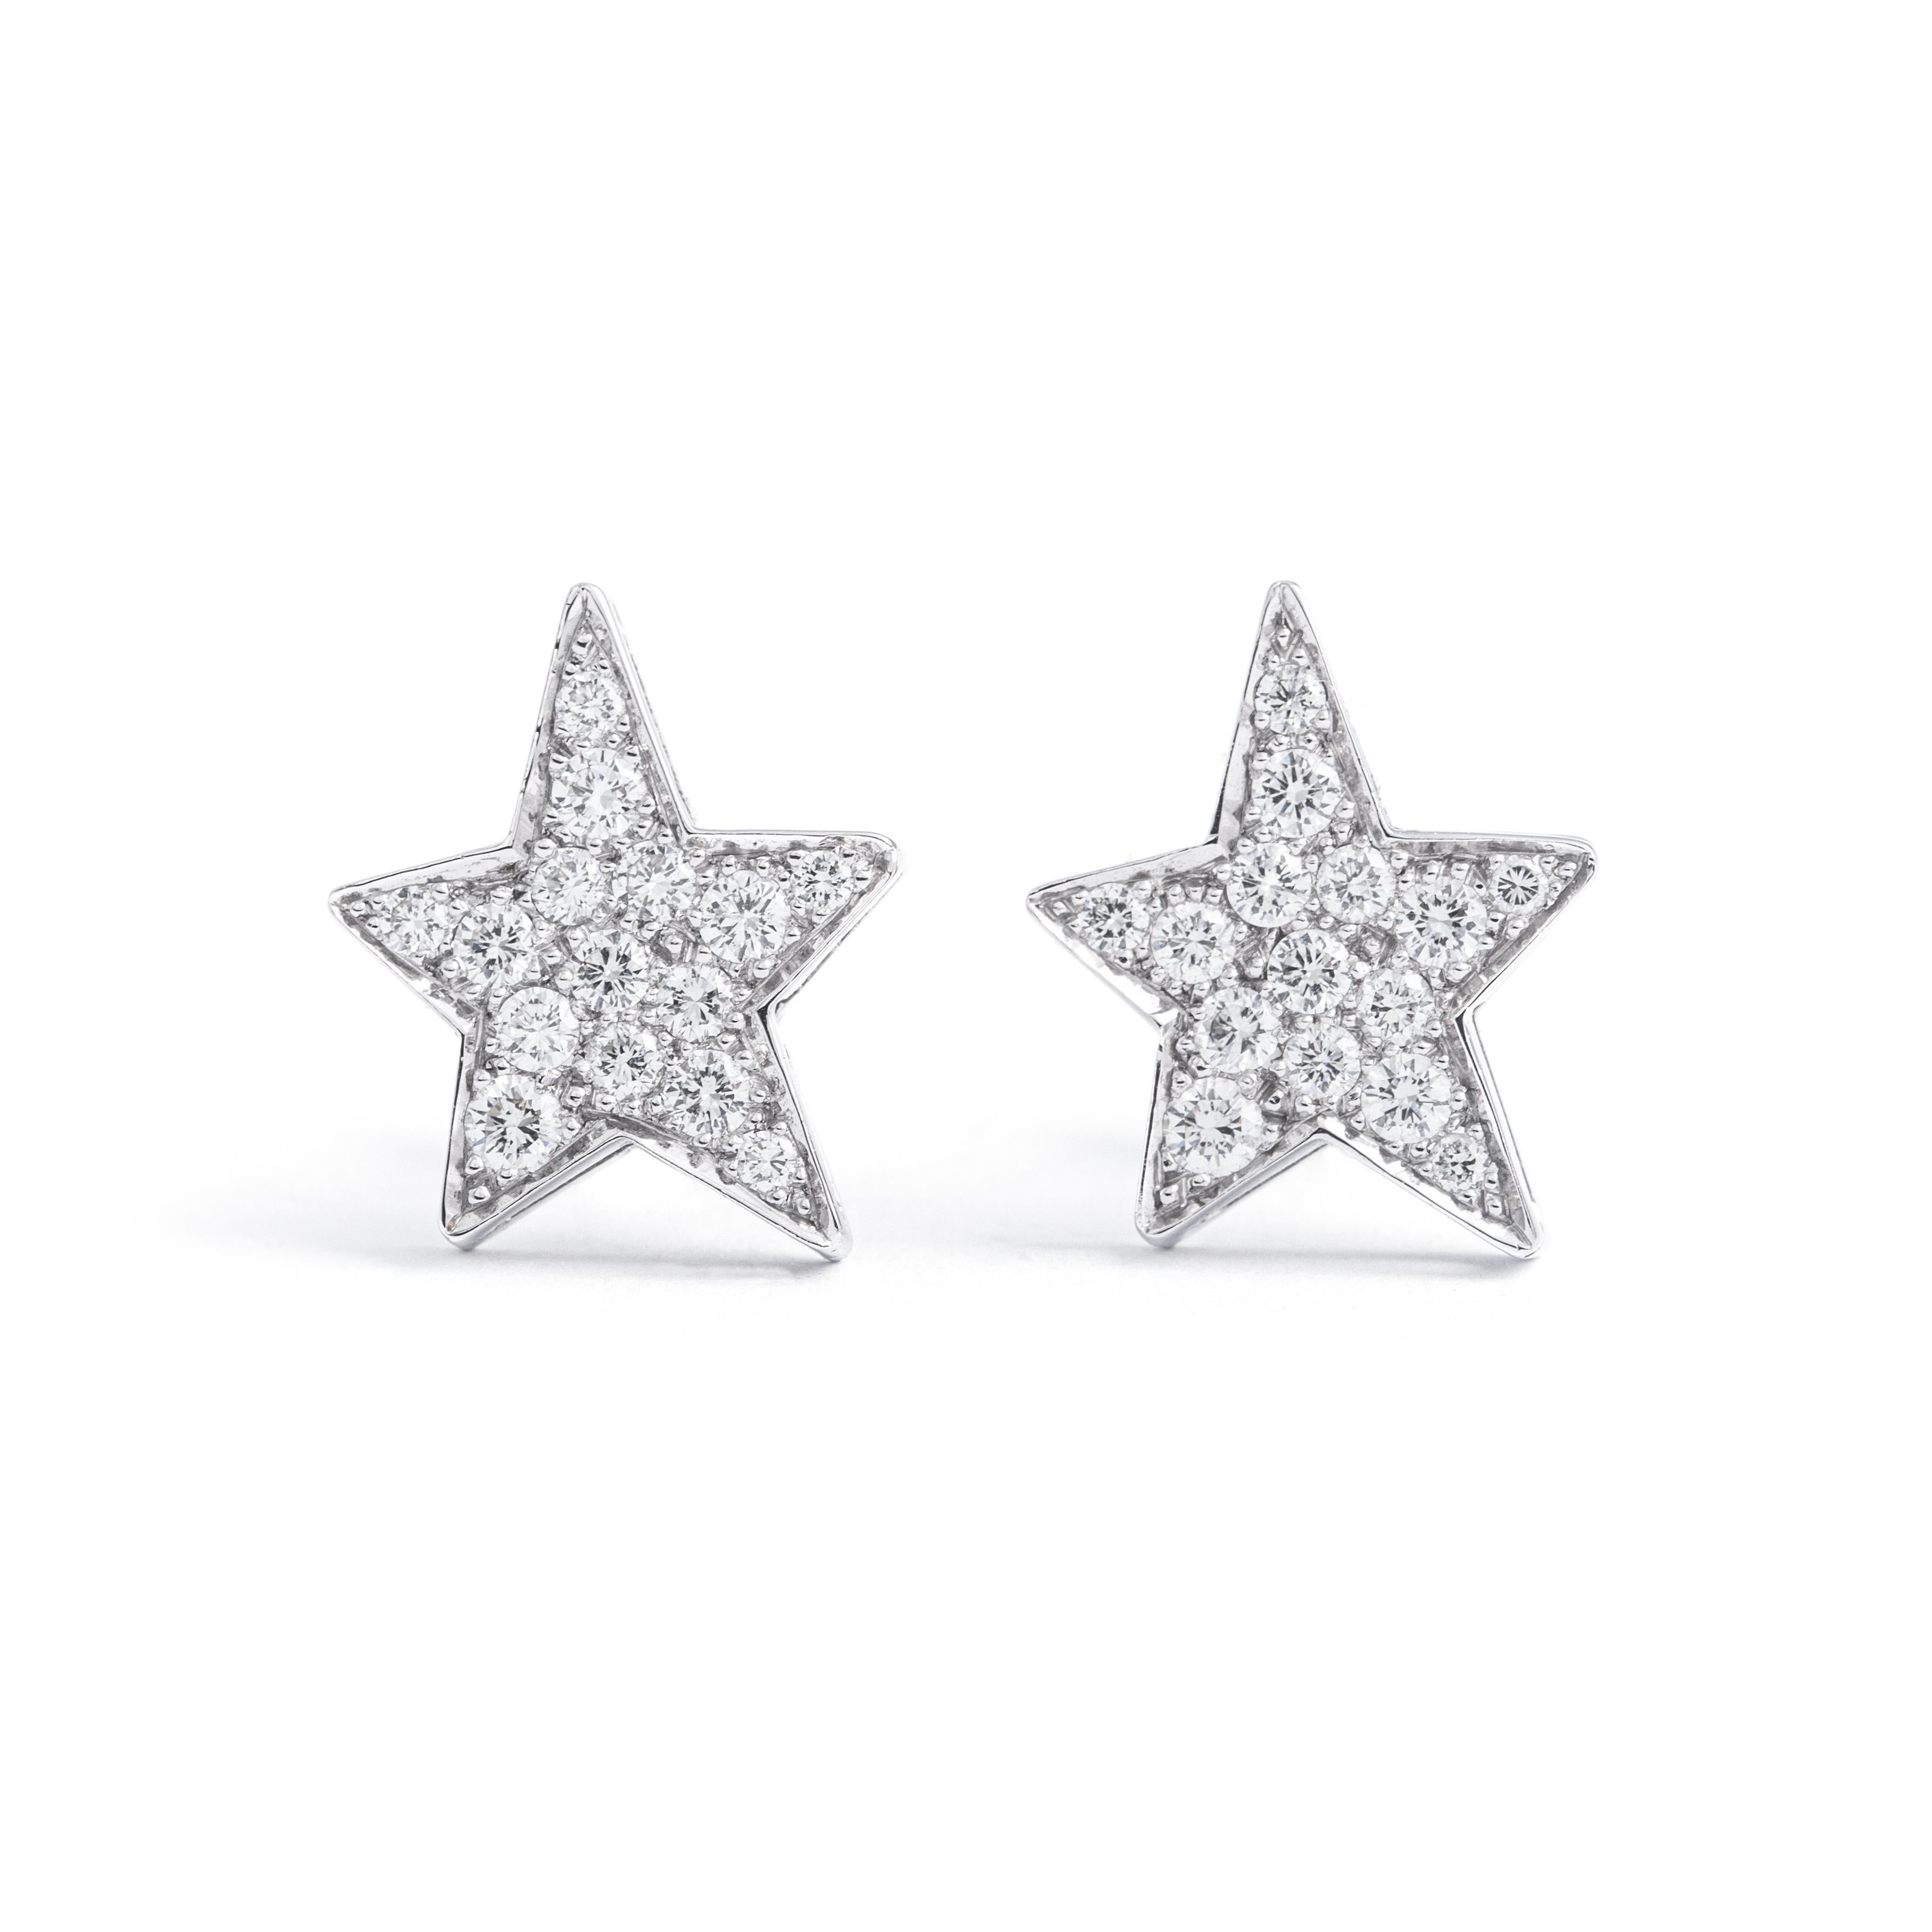 Star design Diamond on White Gold 18K Earrings.
Dimensions: 1.50 centimeters x 1.30 centimeters.

Total weight: 4.21 grams.
